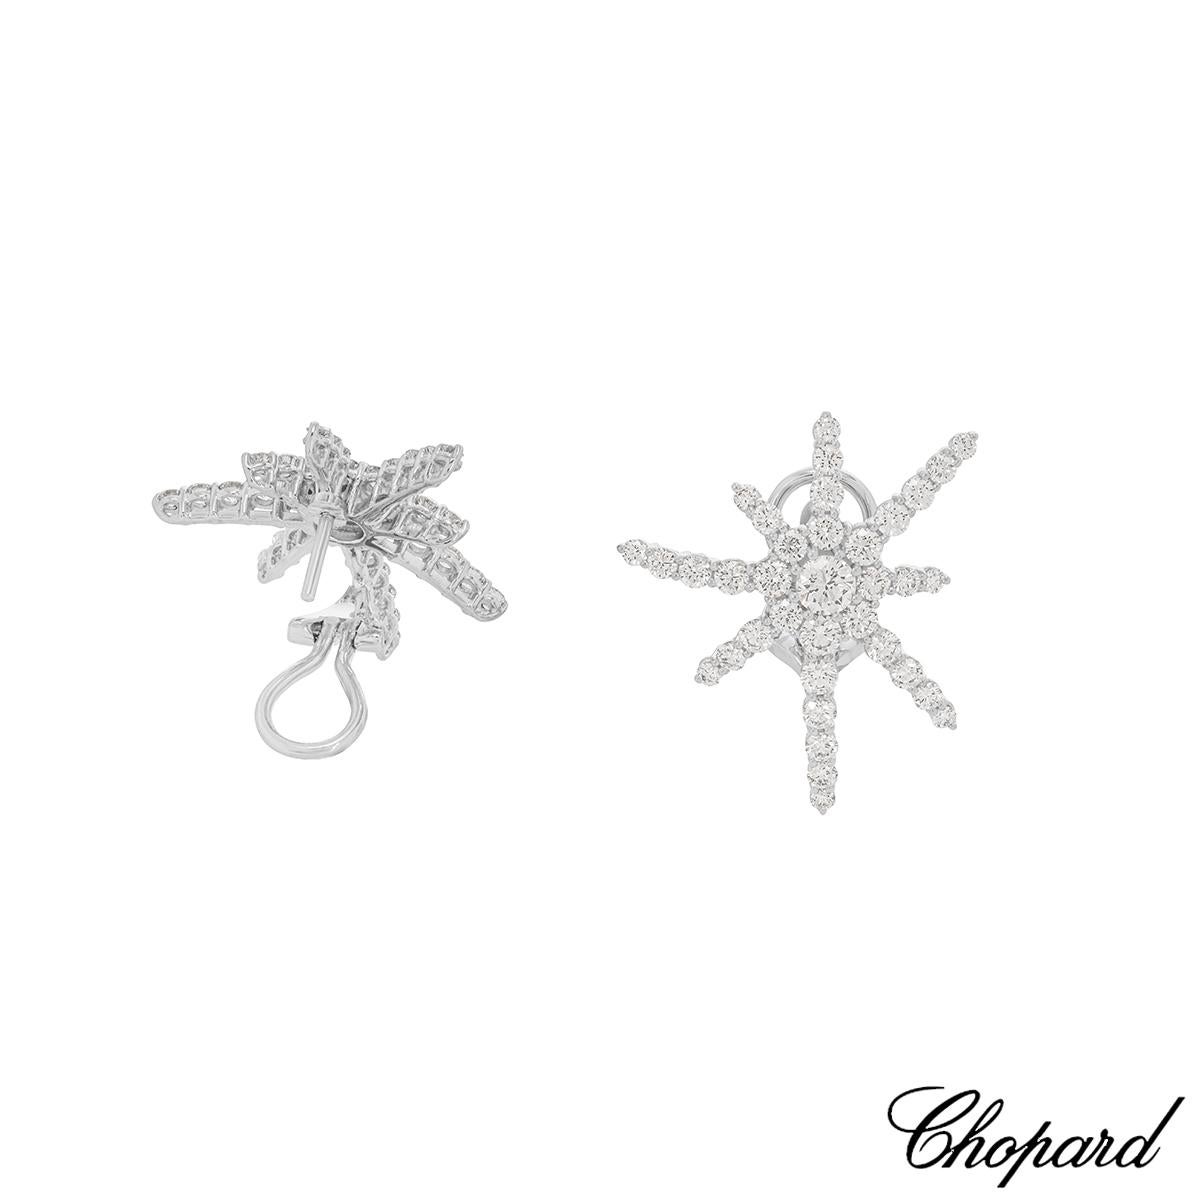 Chopard White Gold Diamond Earrings 84/6525-1001 In Excellent Condition For Sale In London, GB